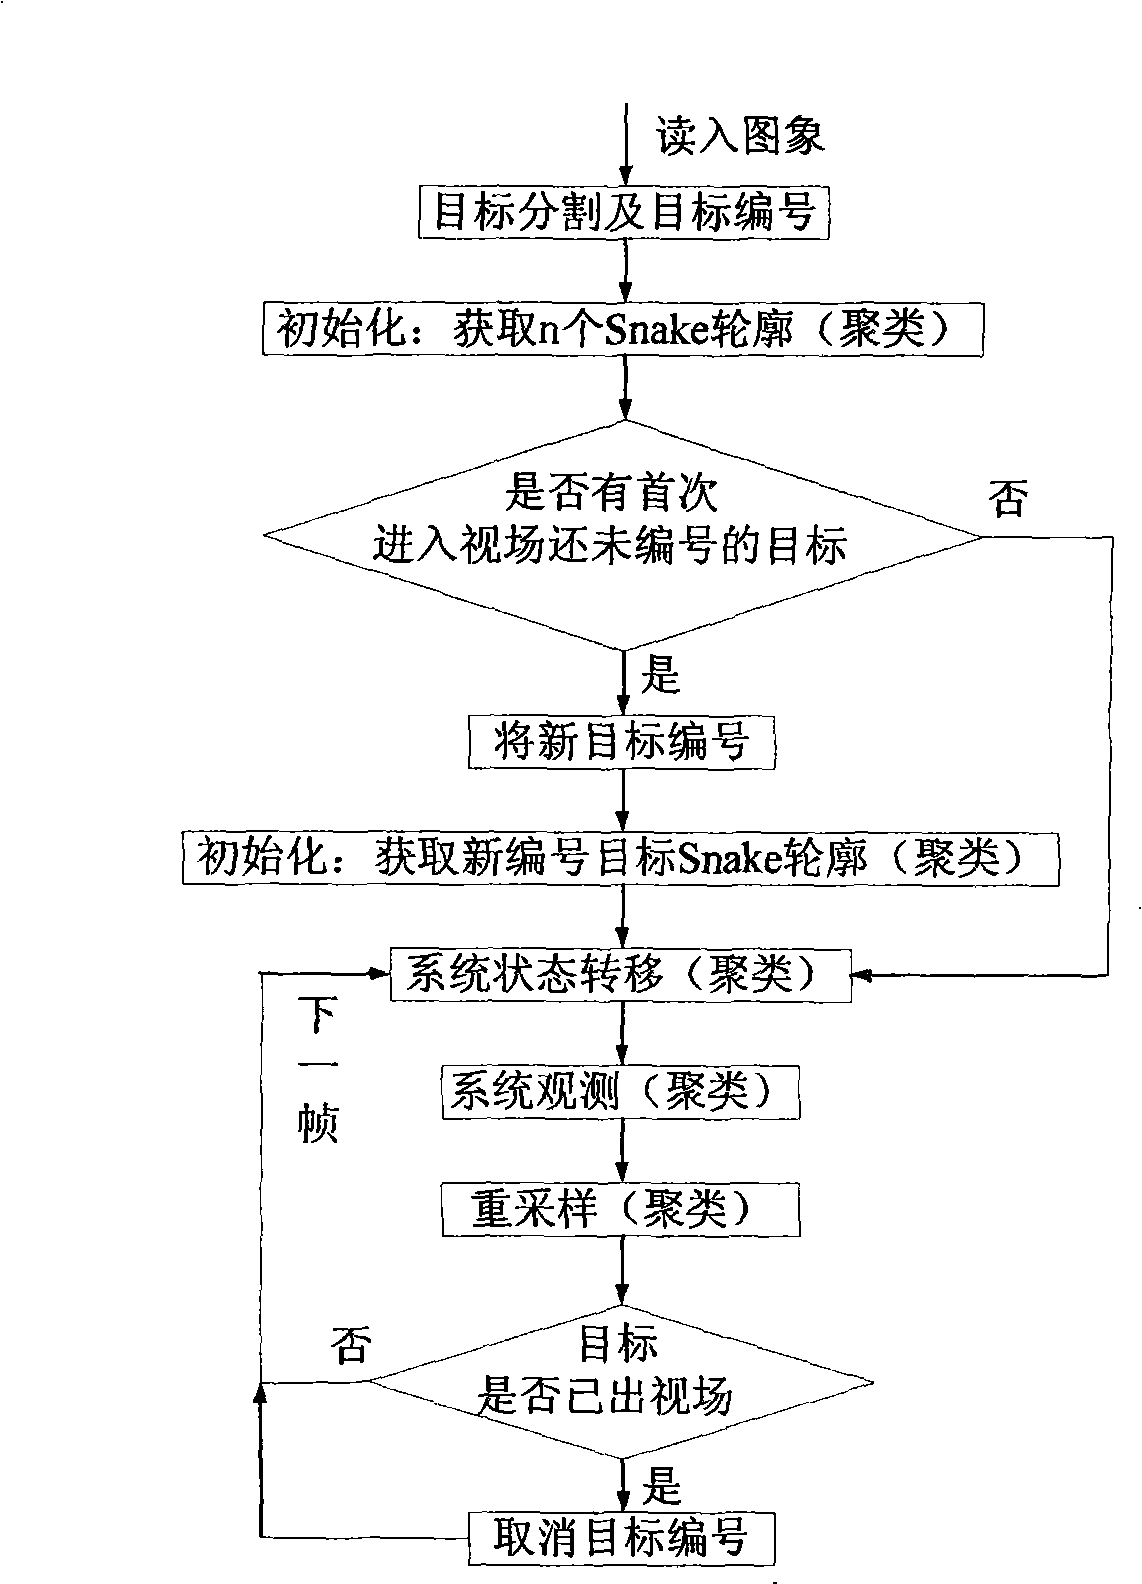 Multi-object tracking method based on particle filtering and movable contour model